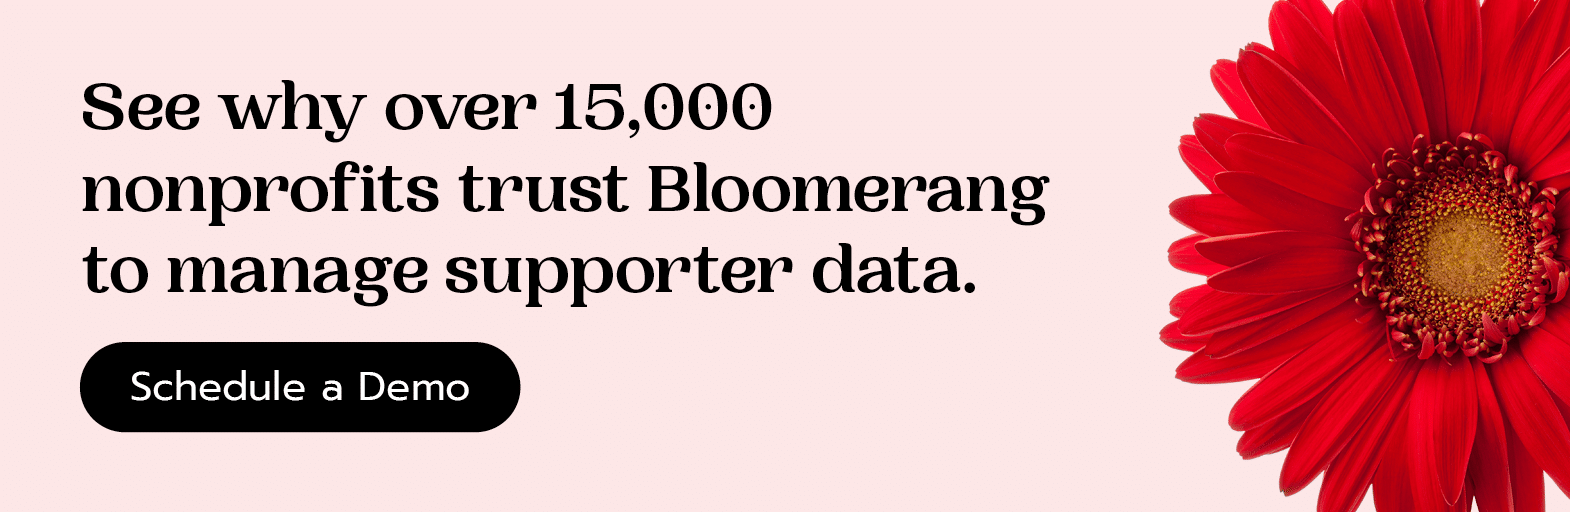 Try the nonprofit software trusted by over 15,000 organizations. Schedule a Bloomerang Demo. 